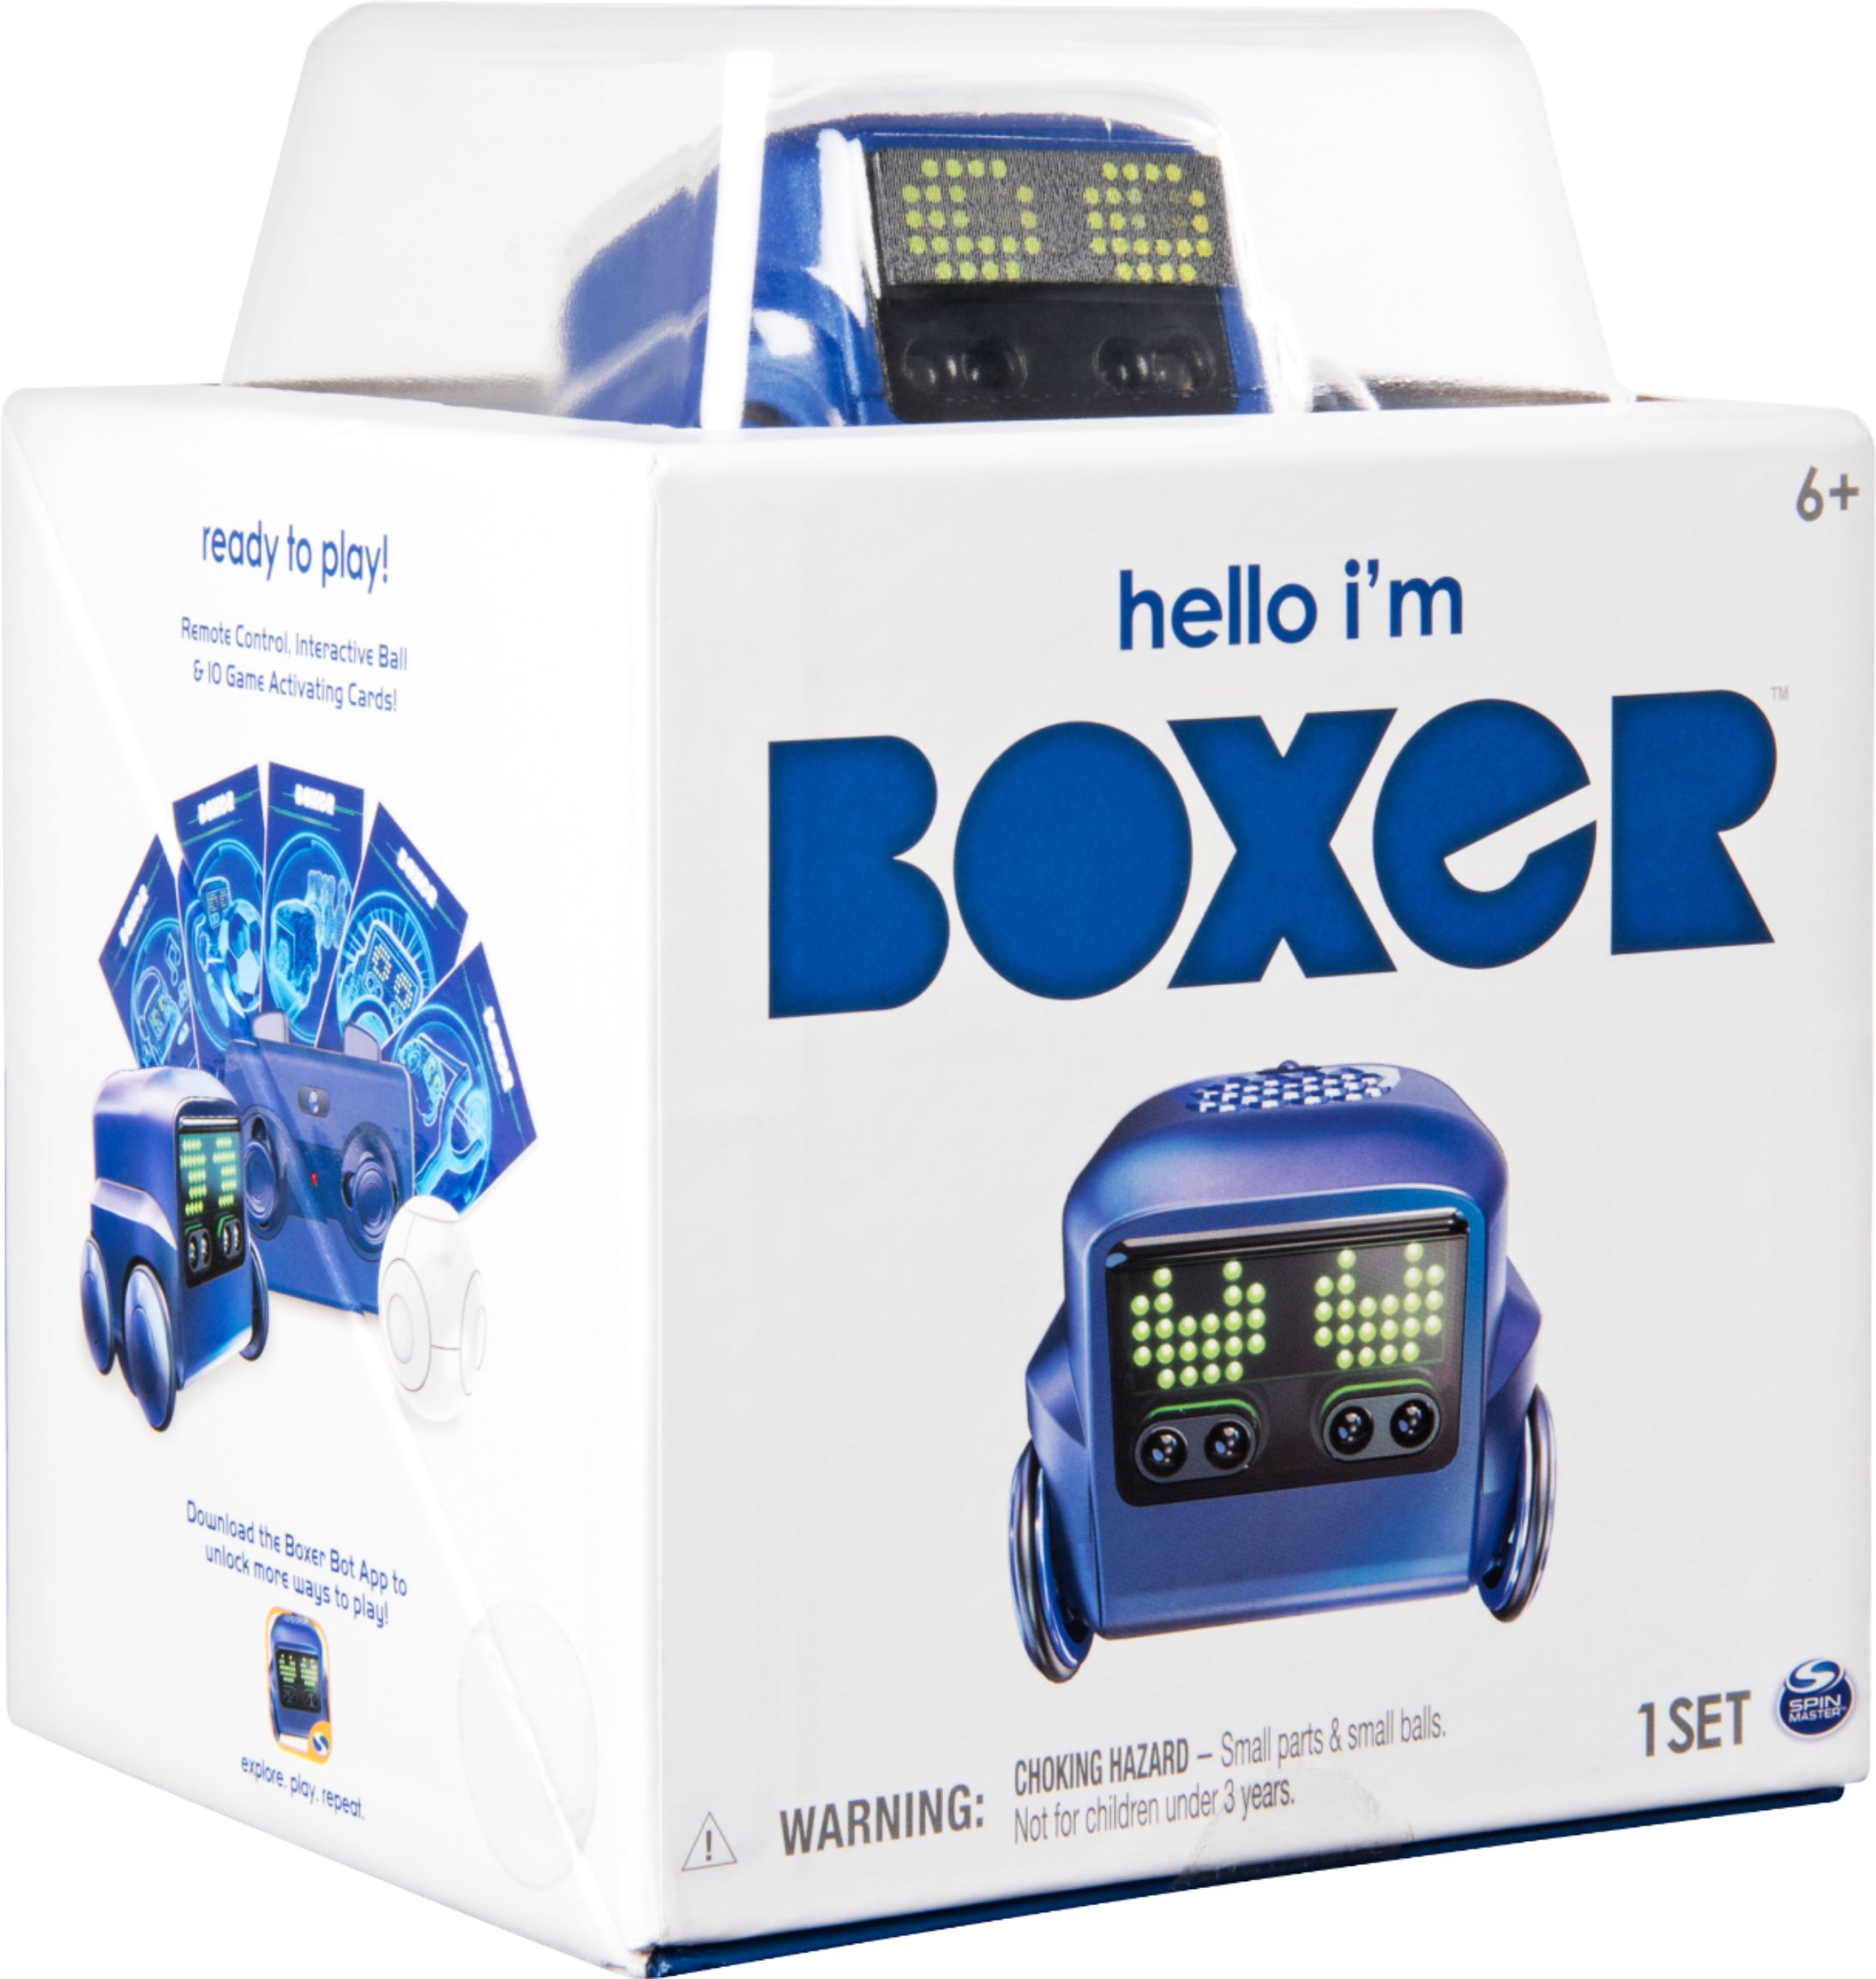 Robot Toy Kids Children Blue Personality Emotions Boxer 6045394 Interactive A.I 